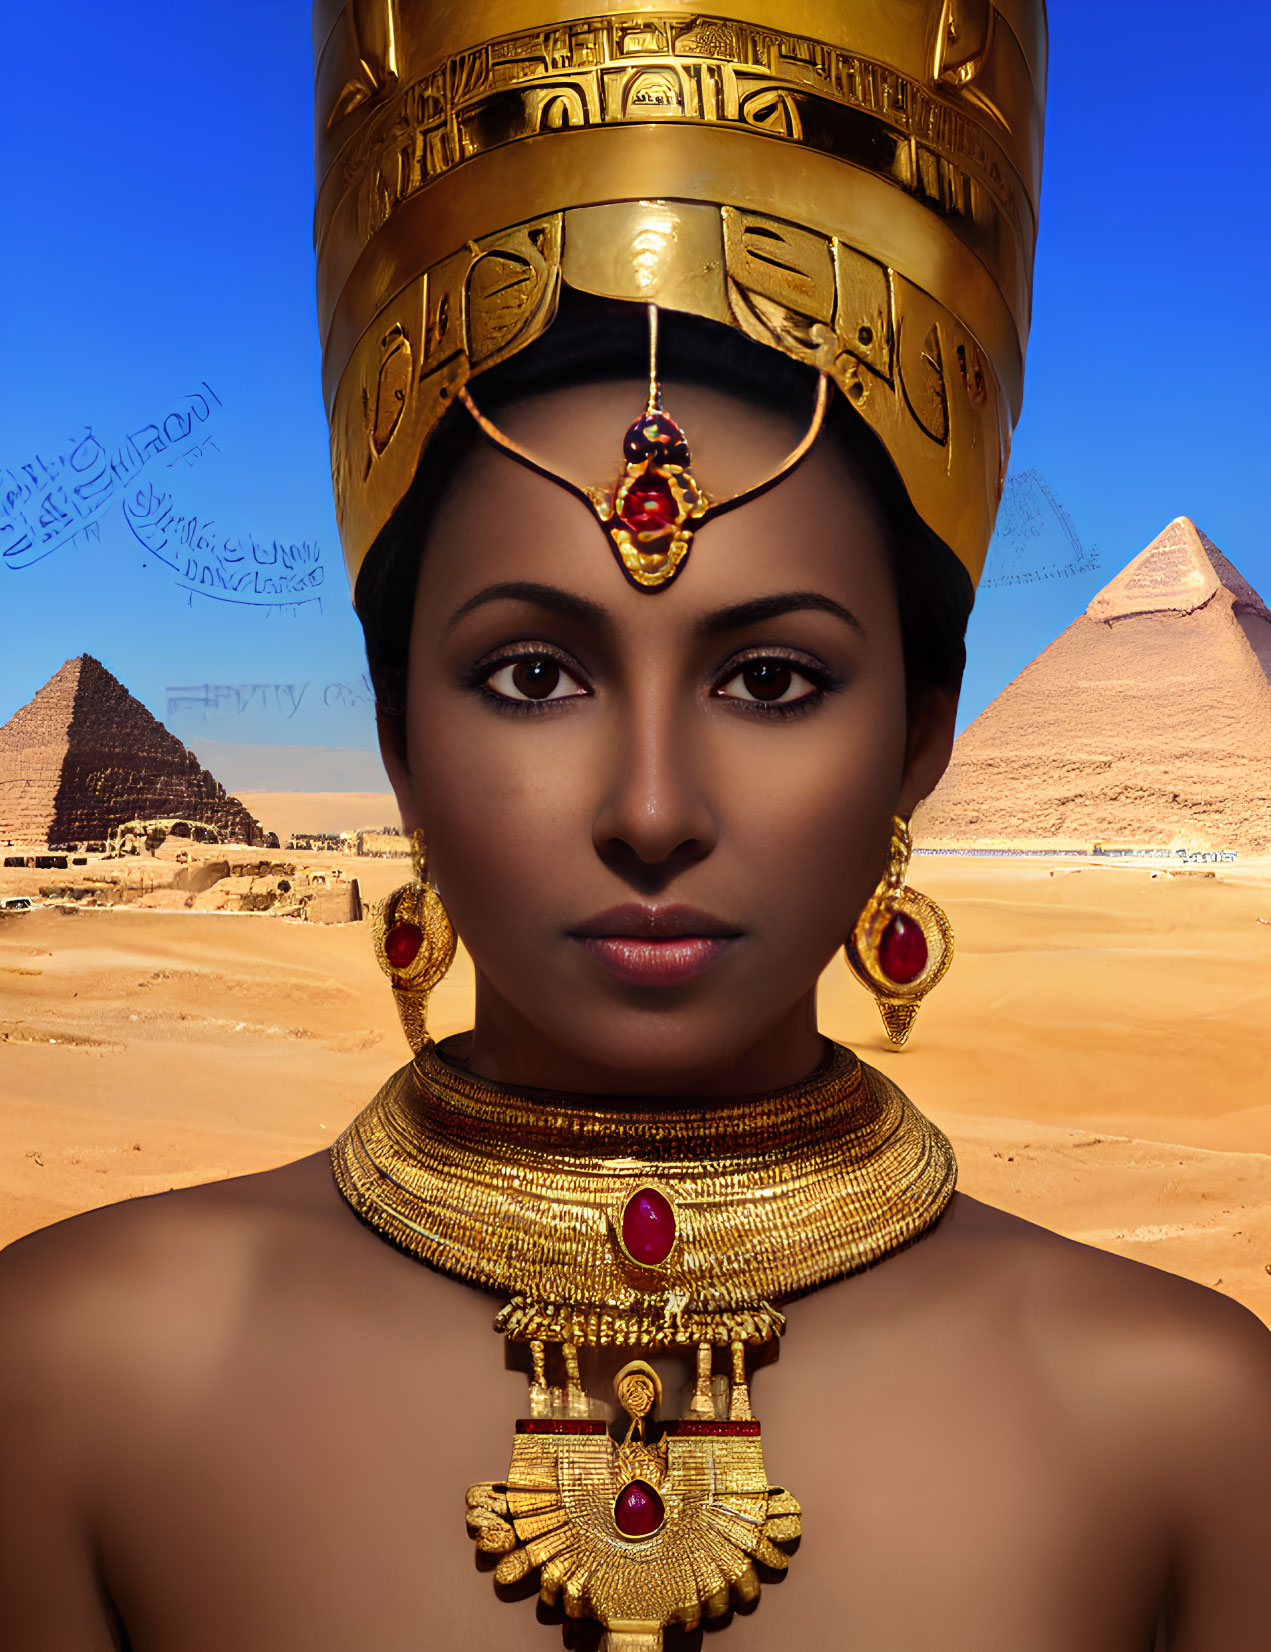 Ancient Egyptian-style costume with pyramids and desert backdrop